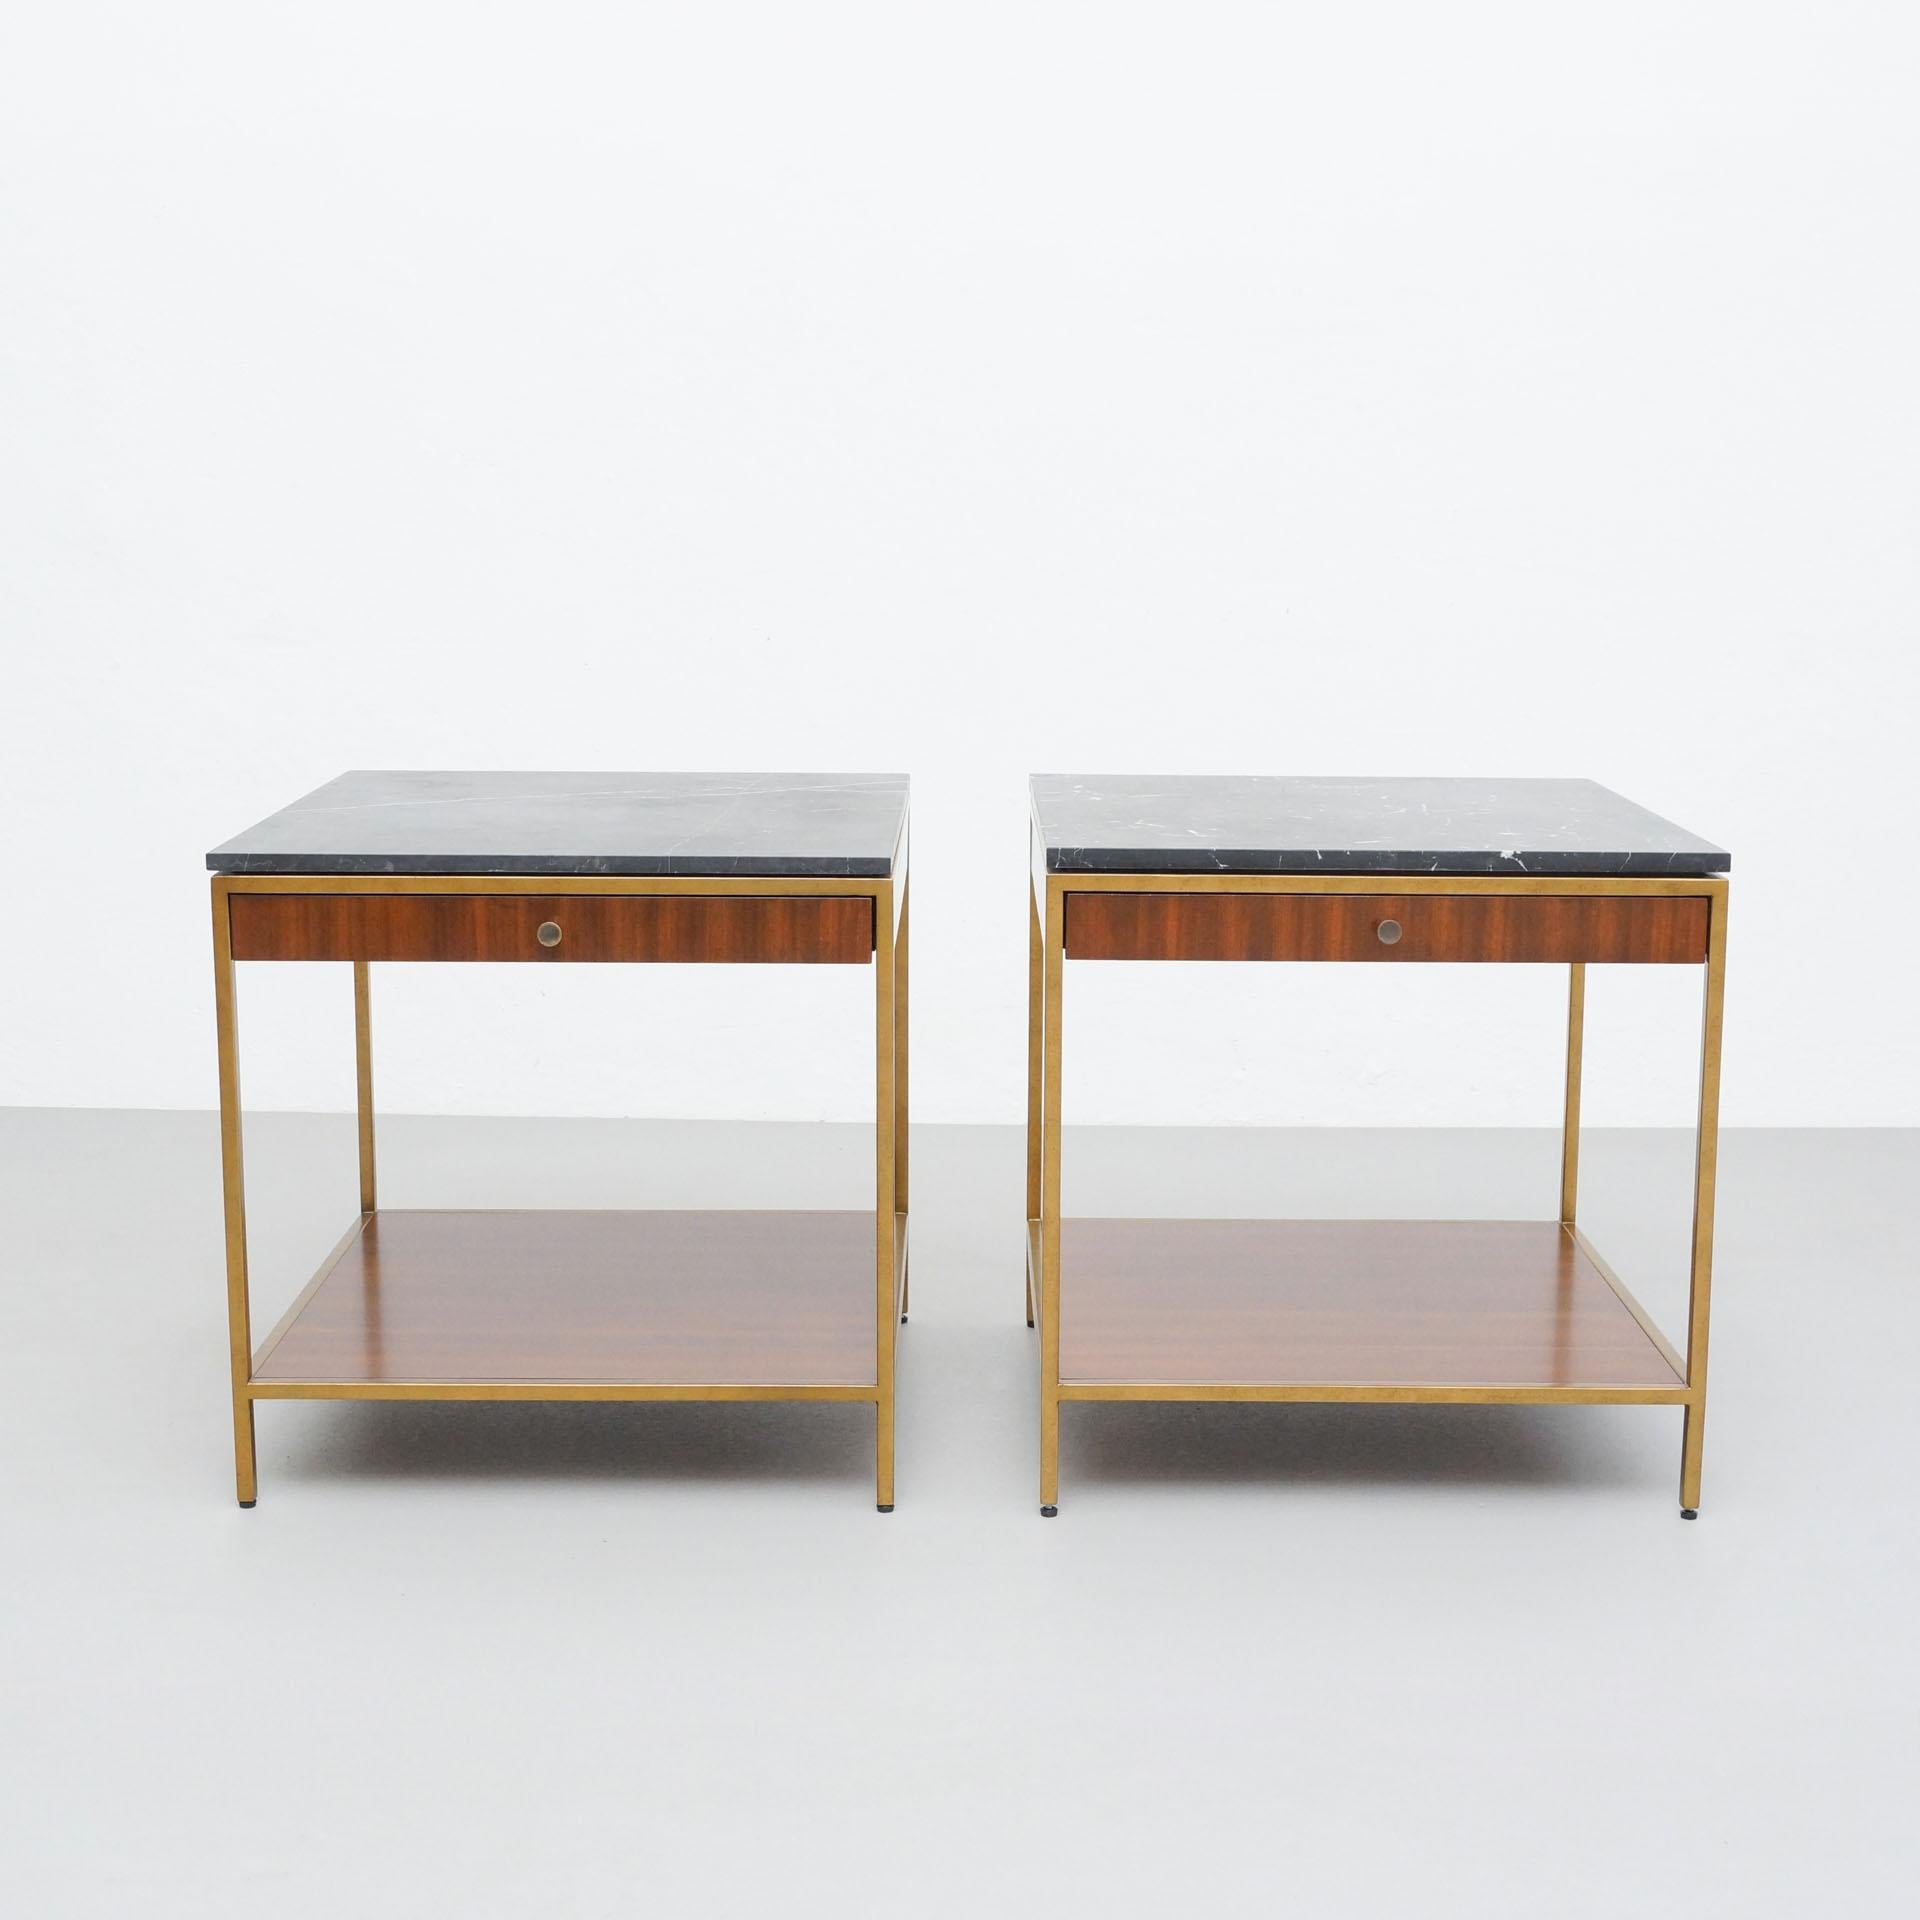 Set of two side tables by unknown designer and manufacturer, circa 2015.
In original condition, with minor wear consistent with age and use, preserving a beautiful patina.

One of the marbles has ben